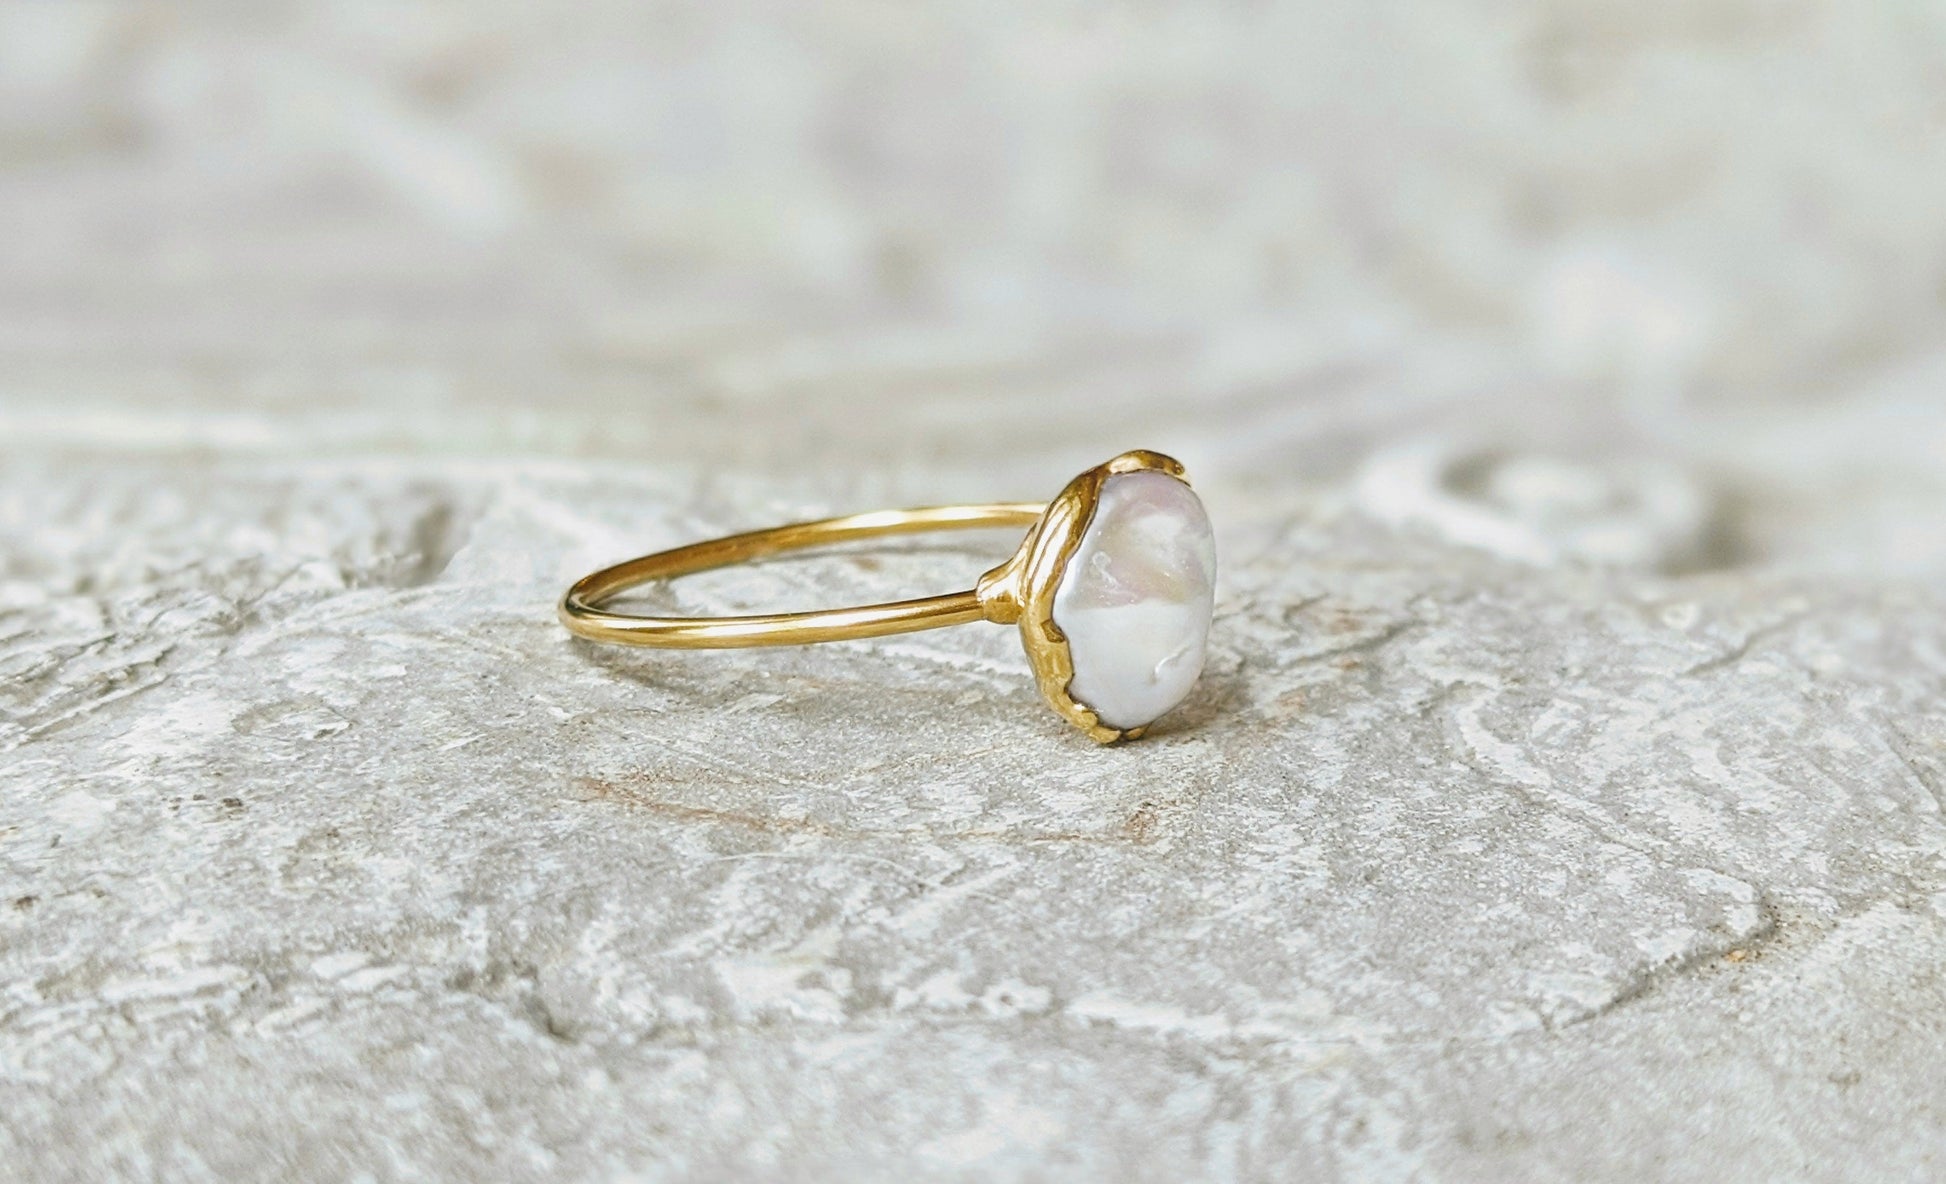 Freshwater Keshi Pearl ring in unique 18k Gold setting